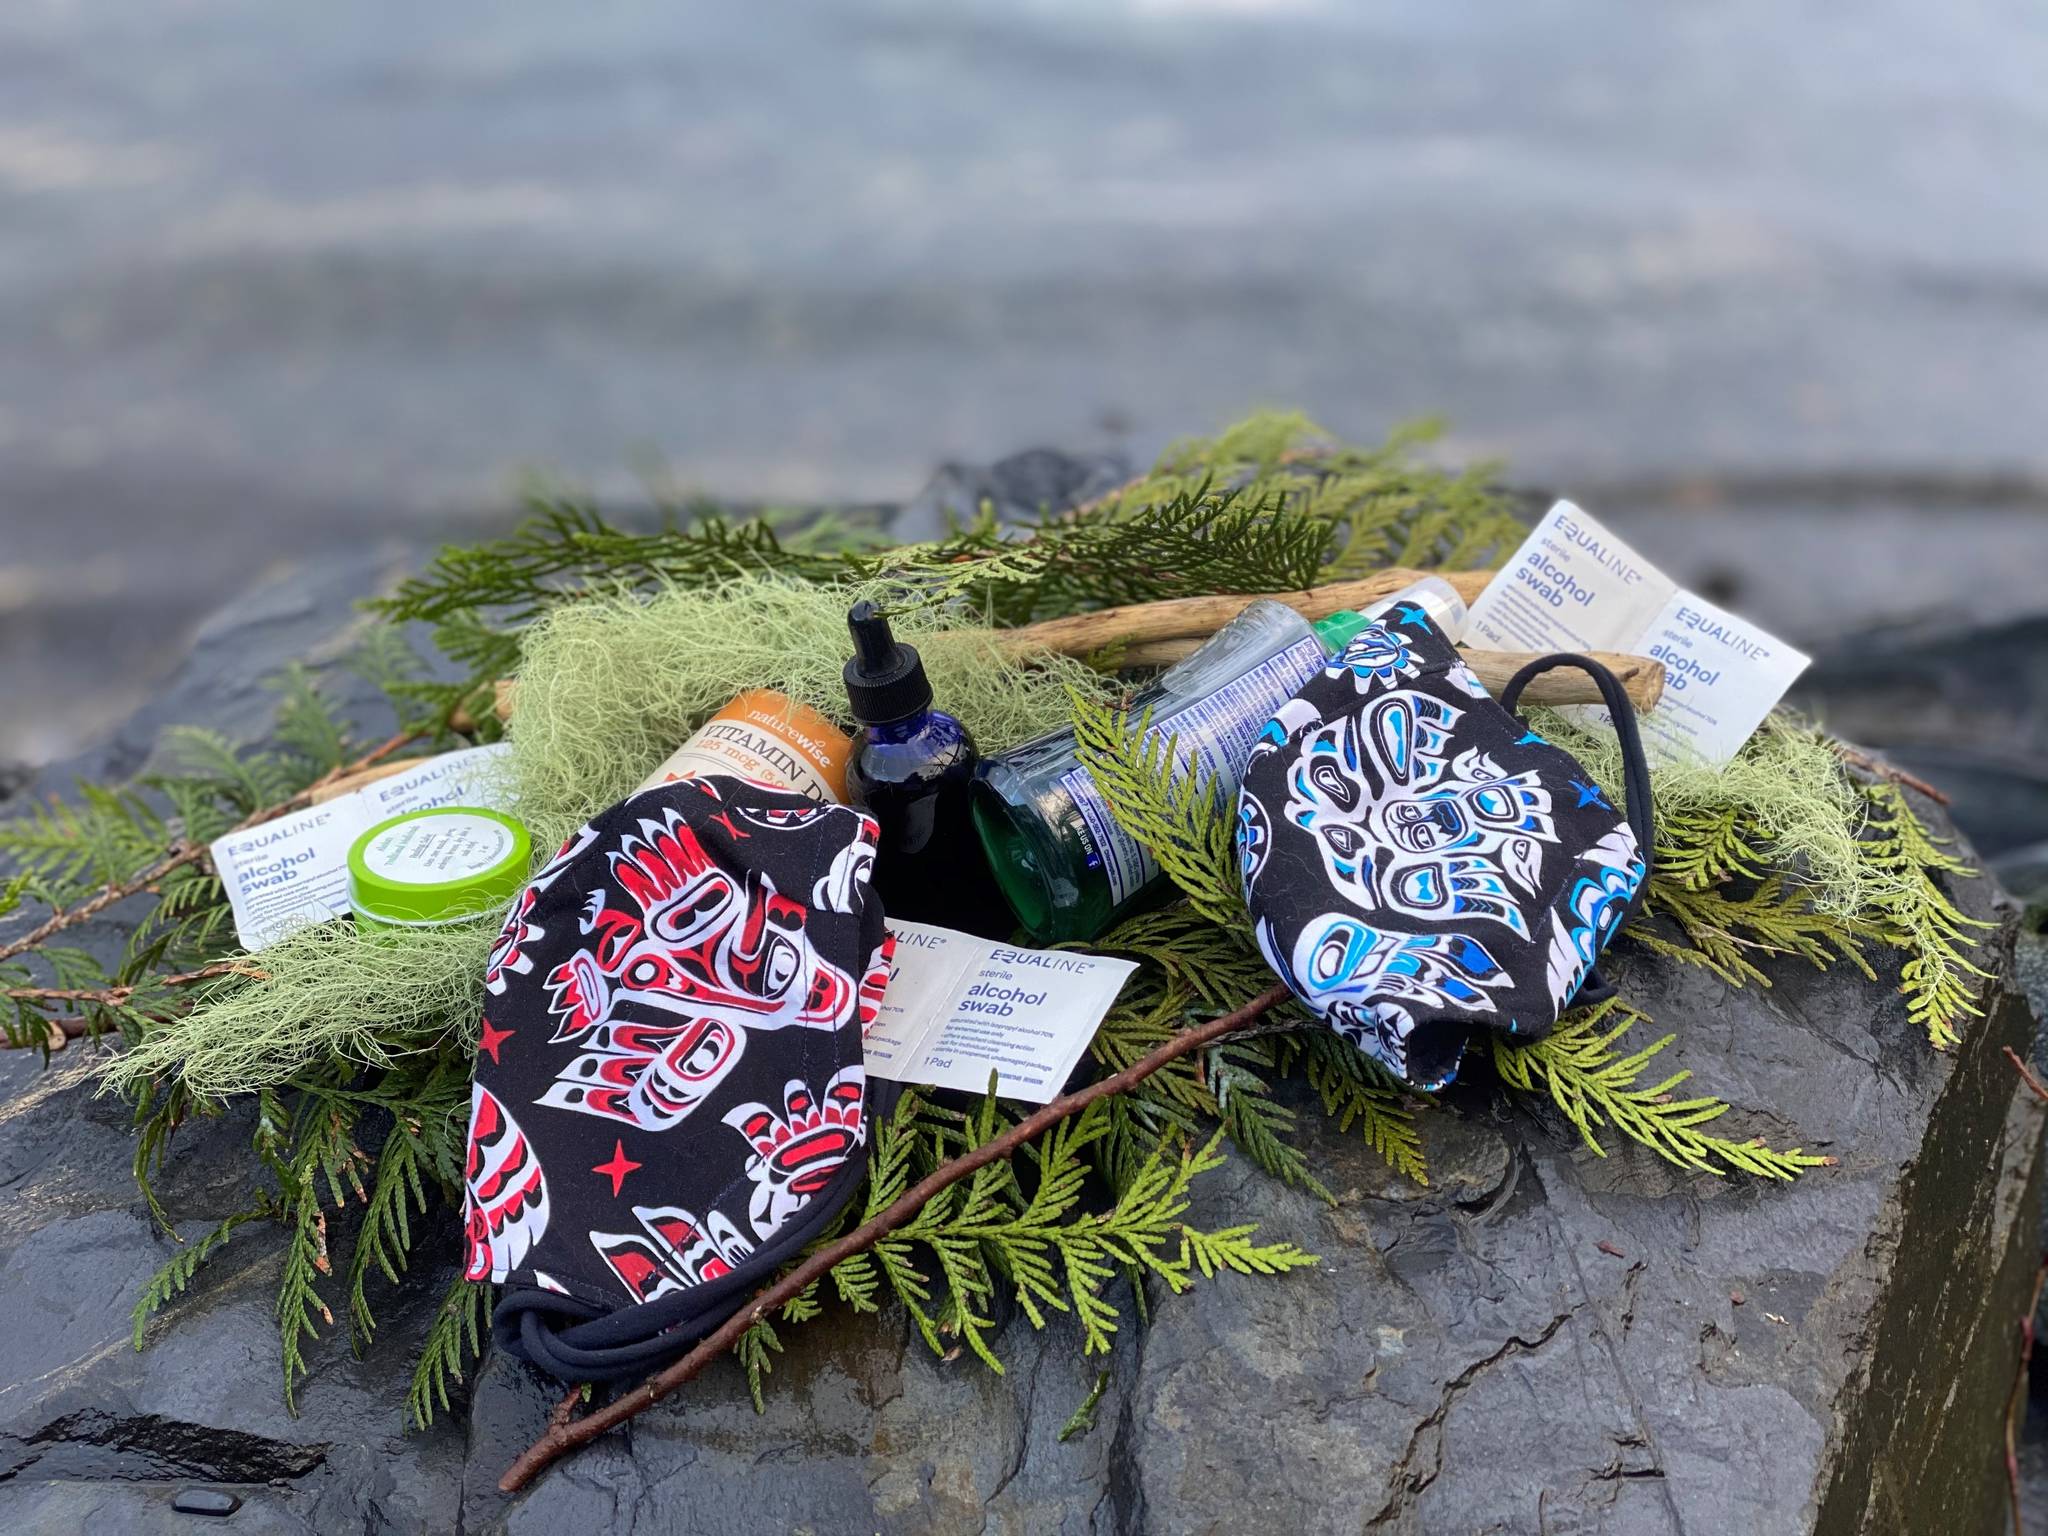 Vivian Faith Prescott / For the Capital City Weekly
This photo shows traditional and modern medicines and masks in Wrangell.